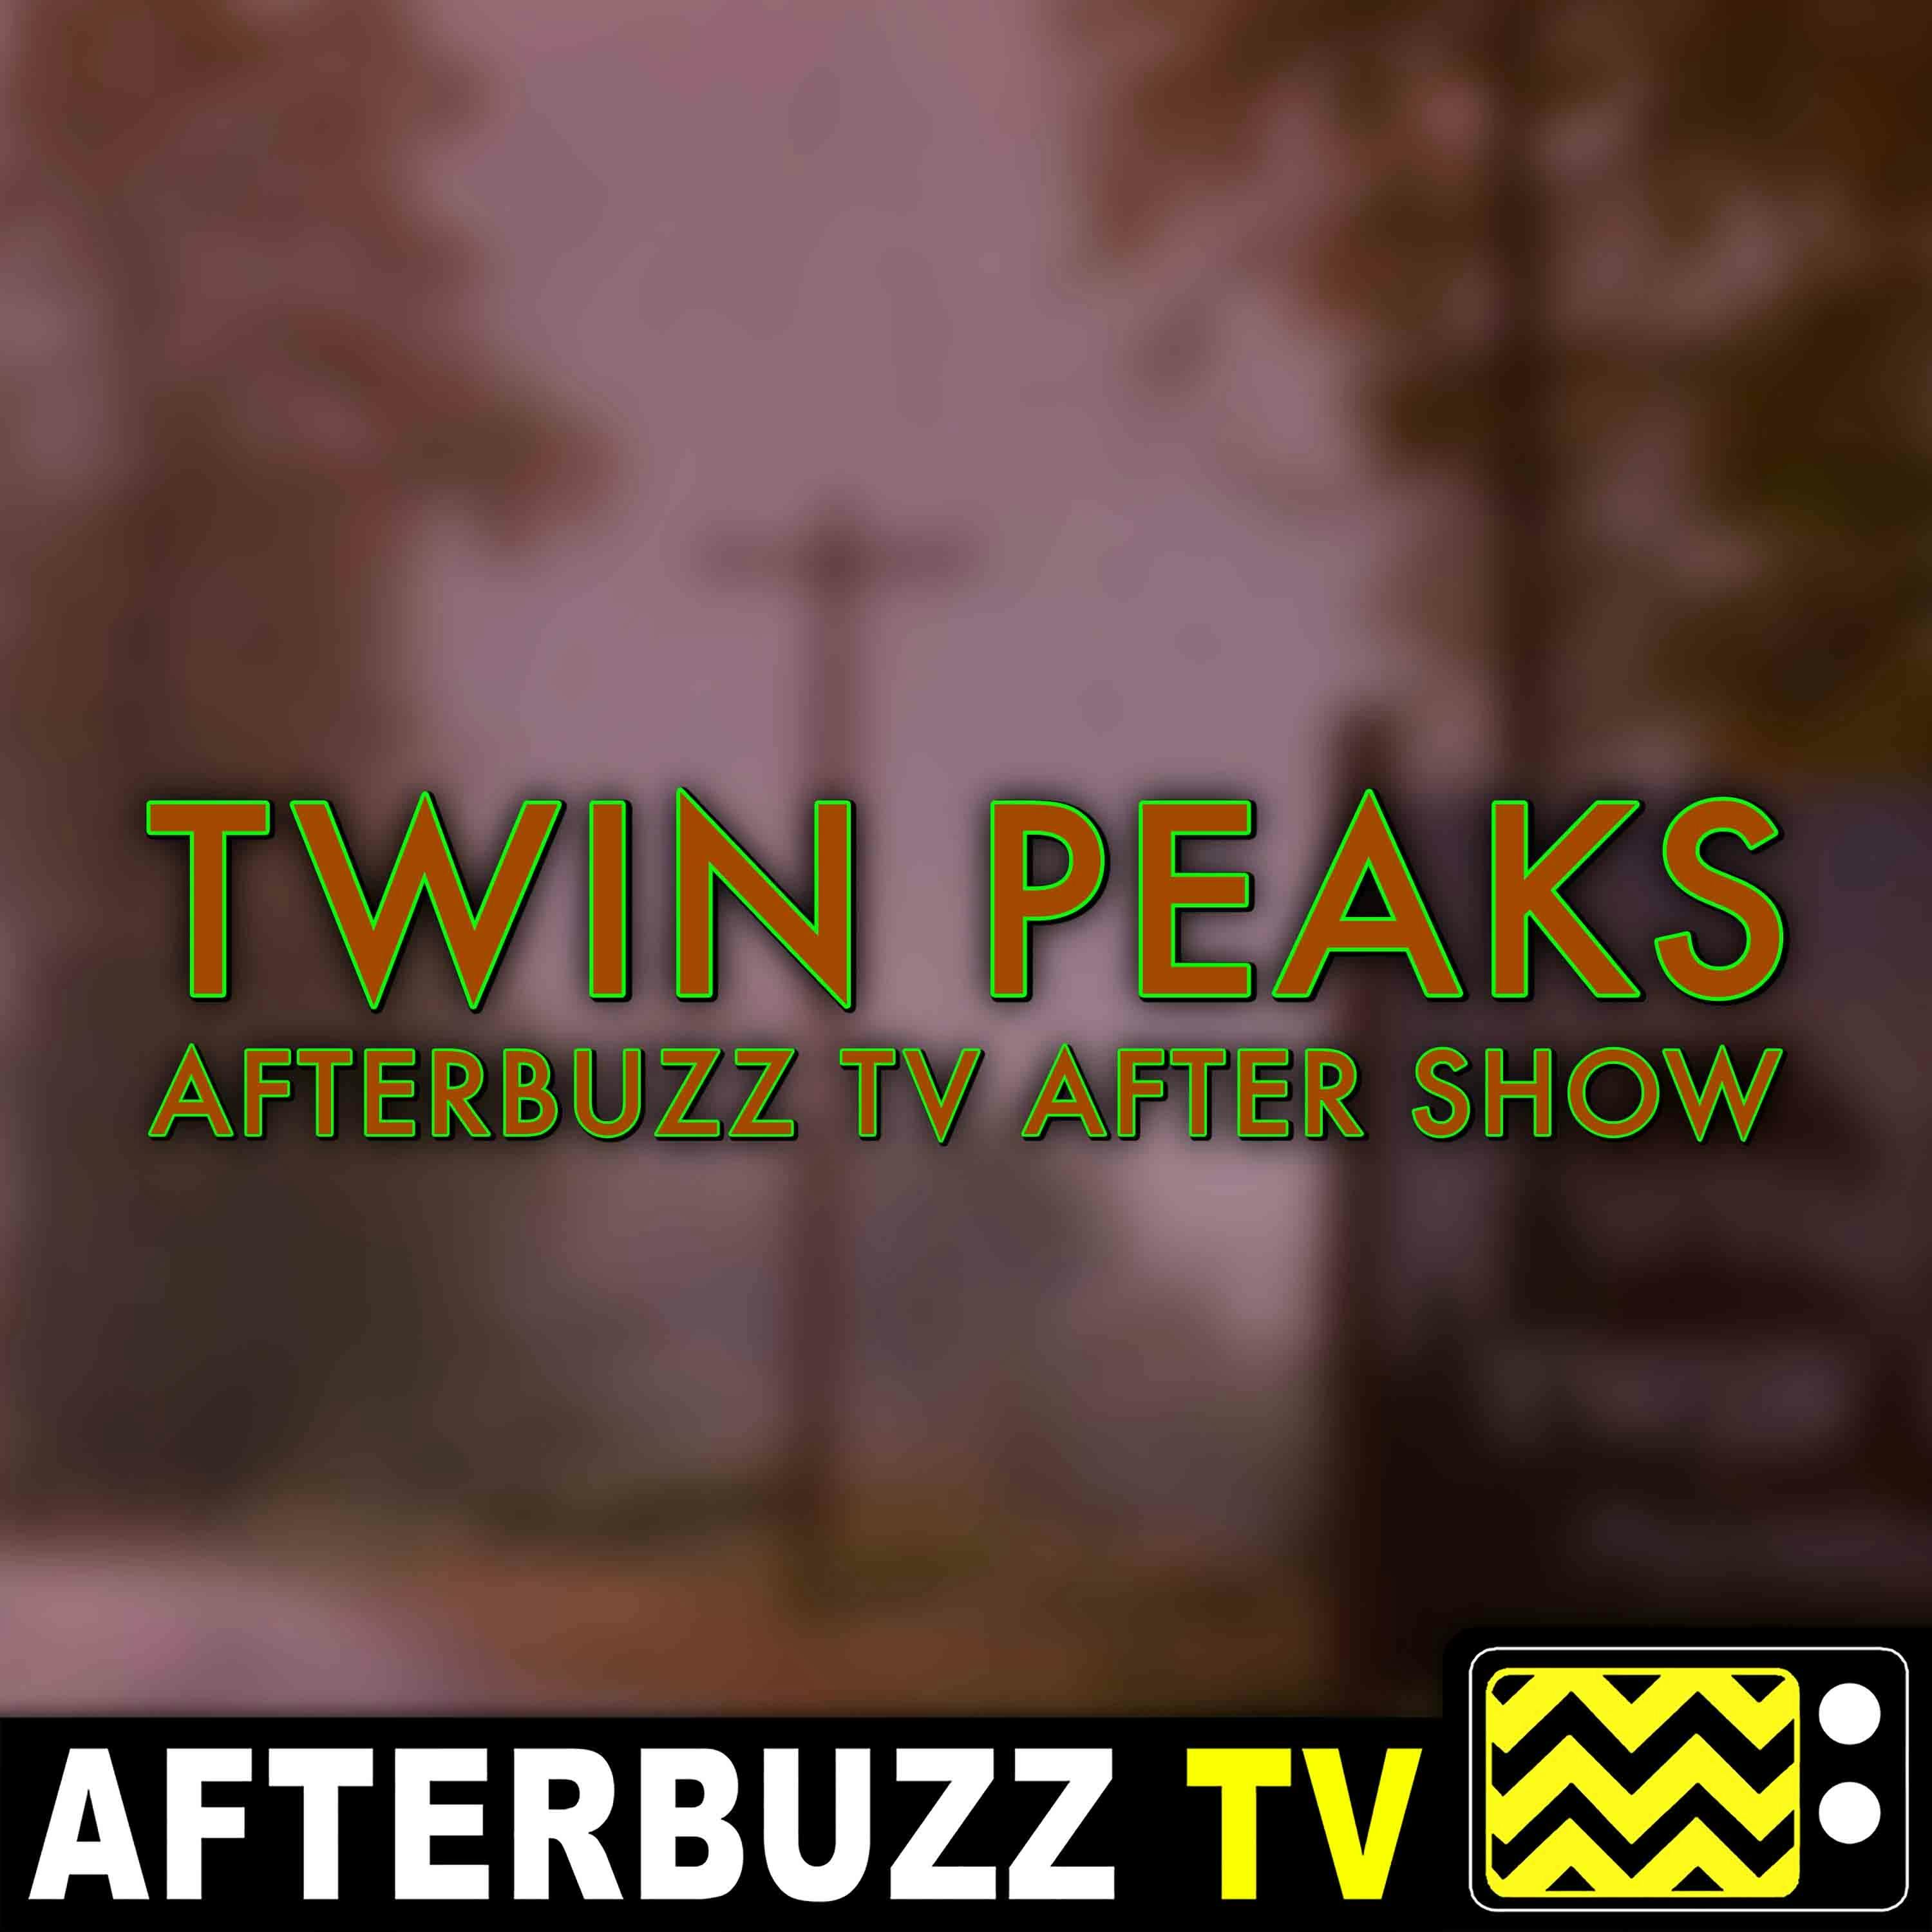 Twin Peaks S:1 | The Return: Part 8 E:8 | AfterBuzz TV AfterShow